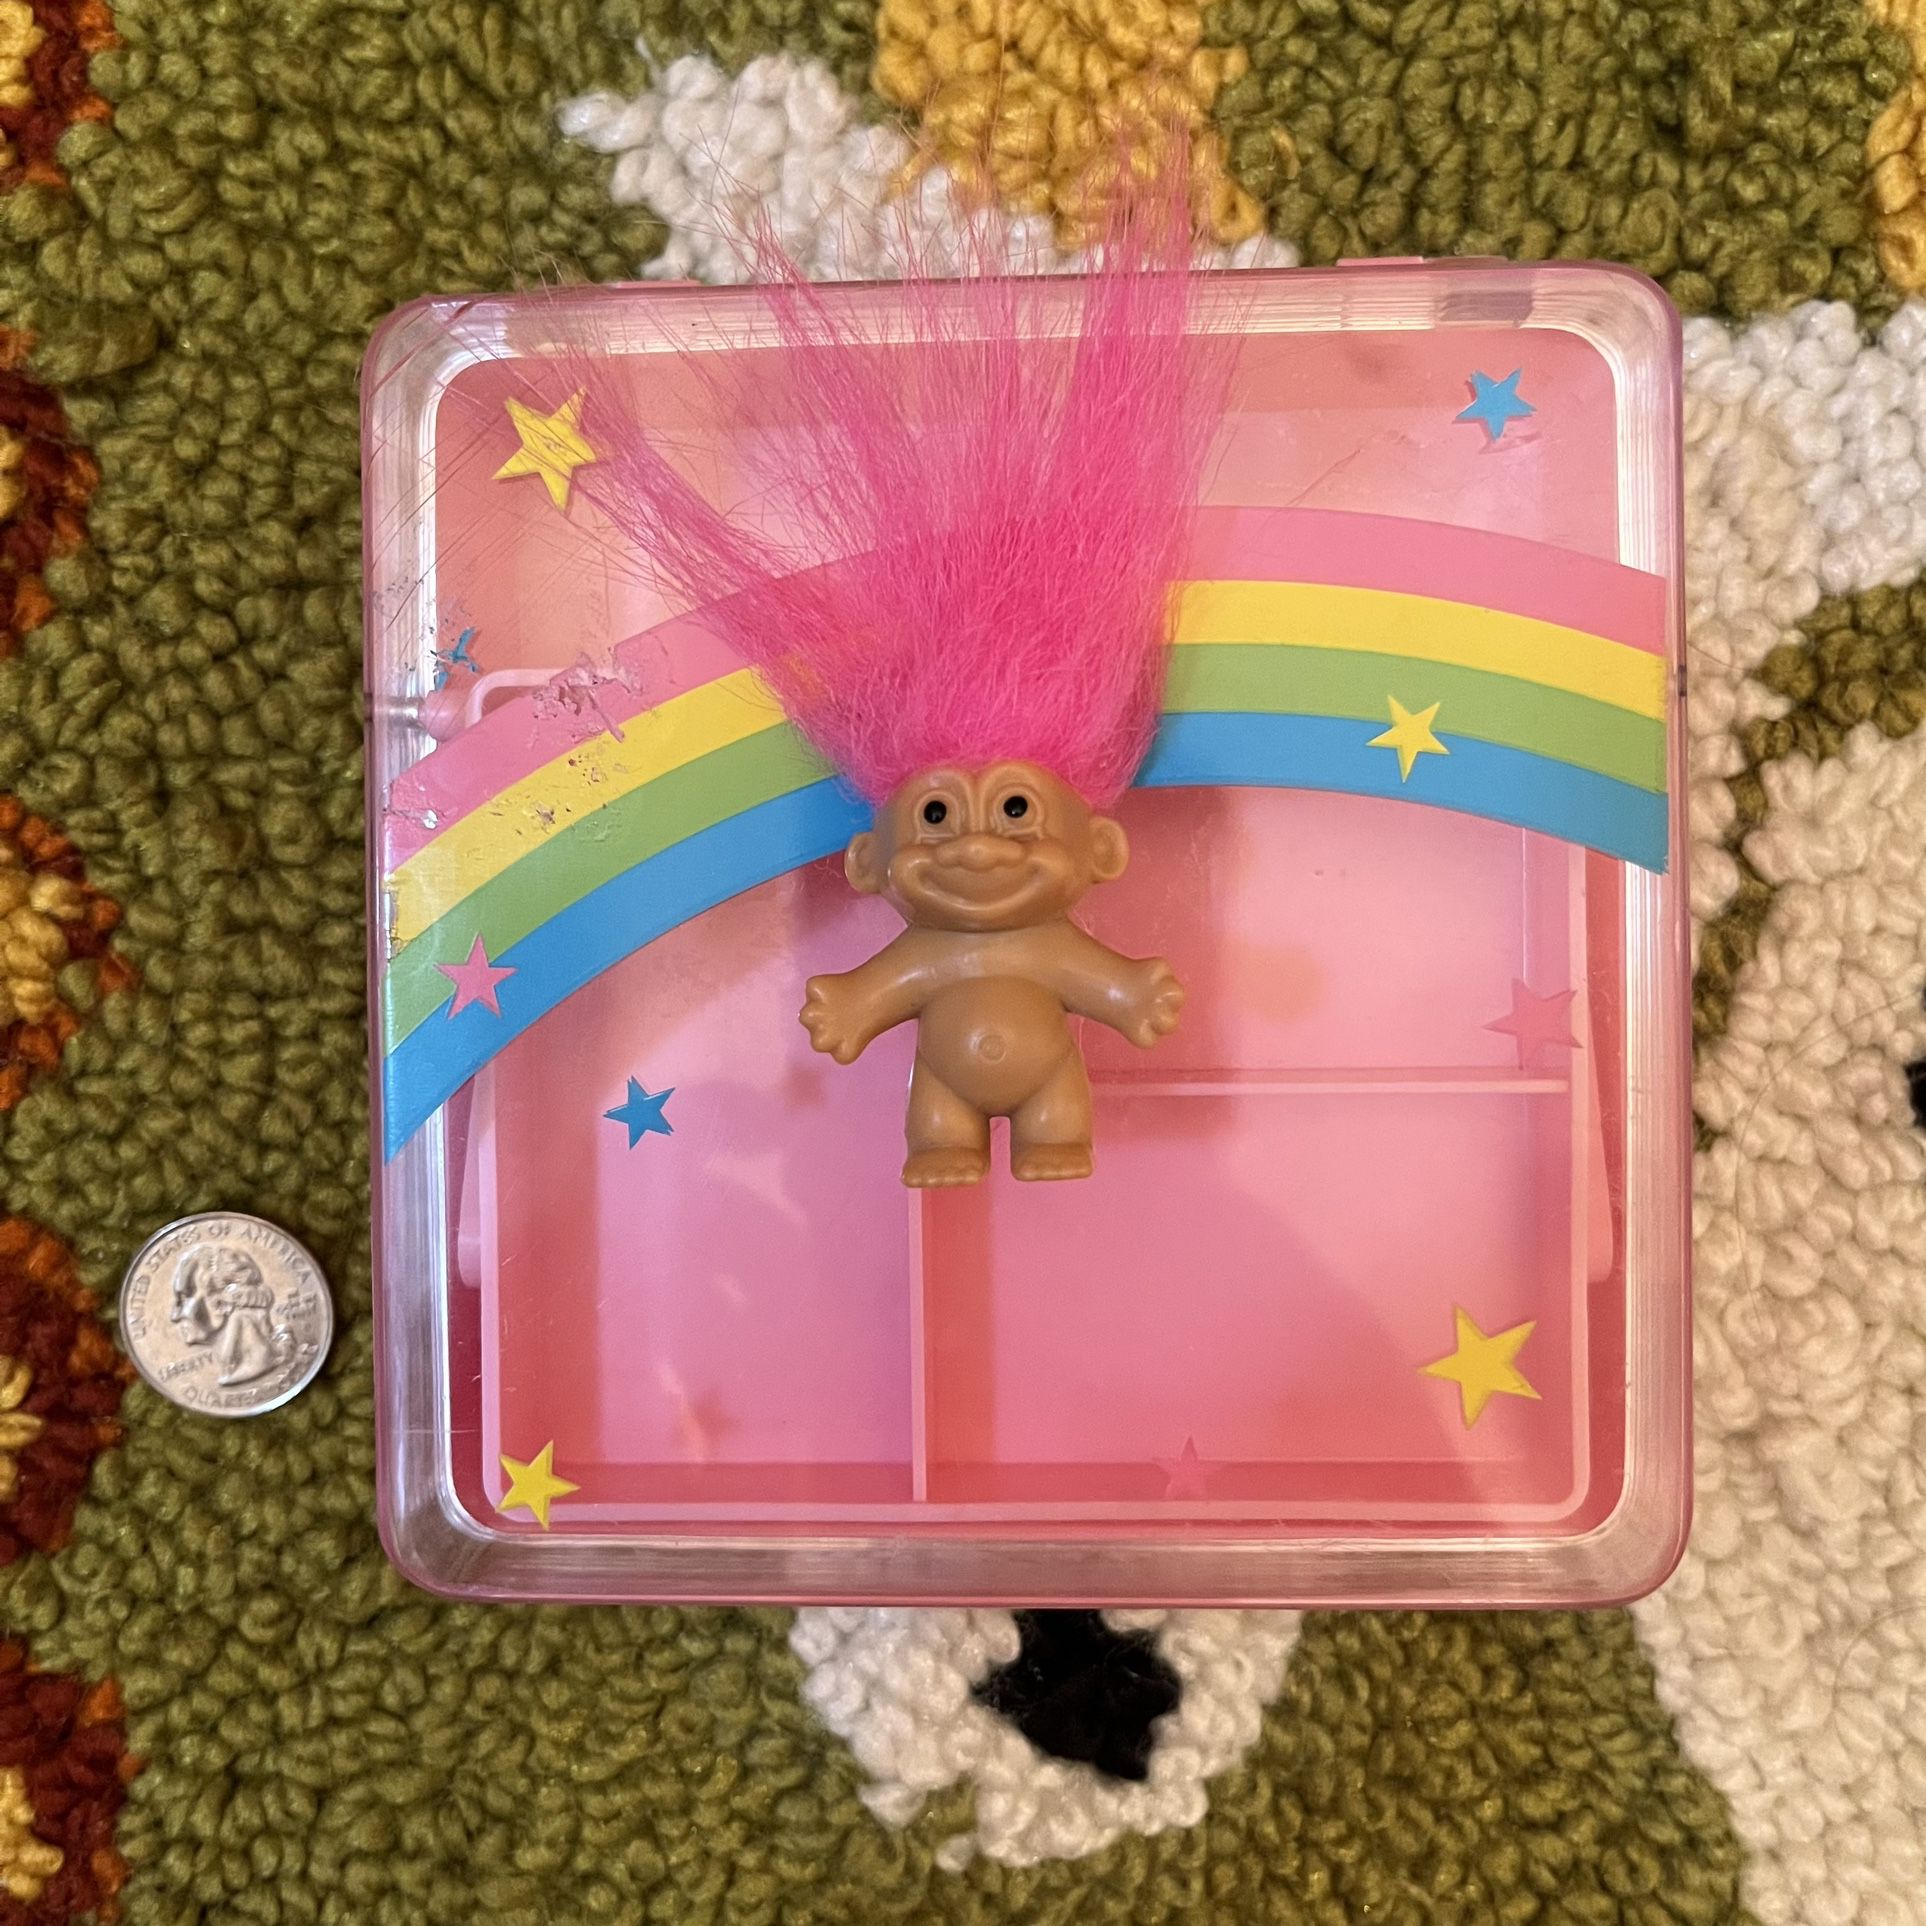 Vintage Troll Doll Travel Jewelry Box Caboodle (1990s Toy Russ Berrie)